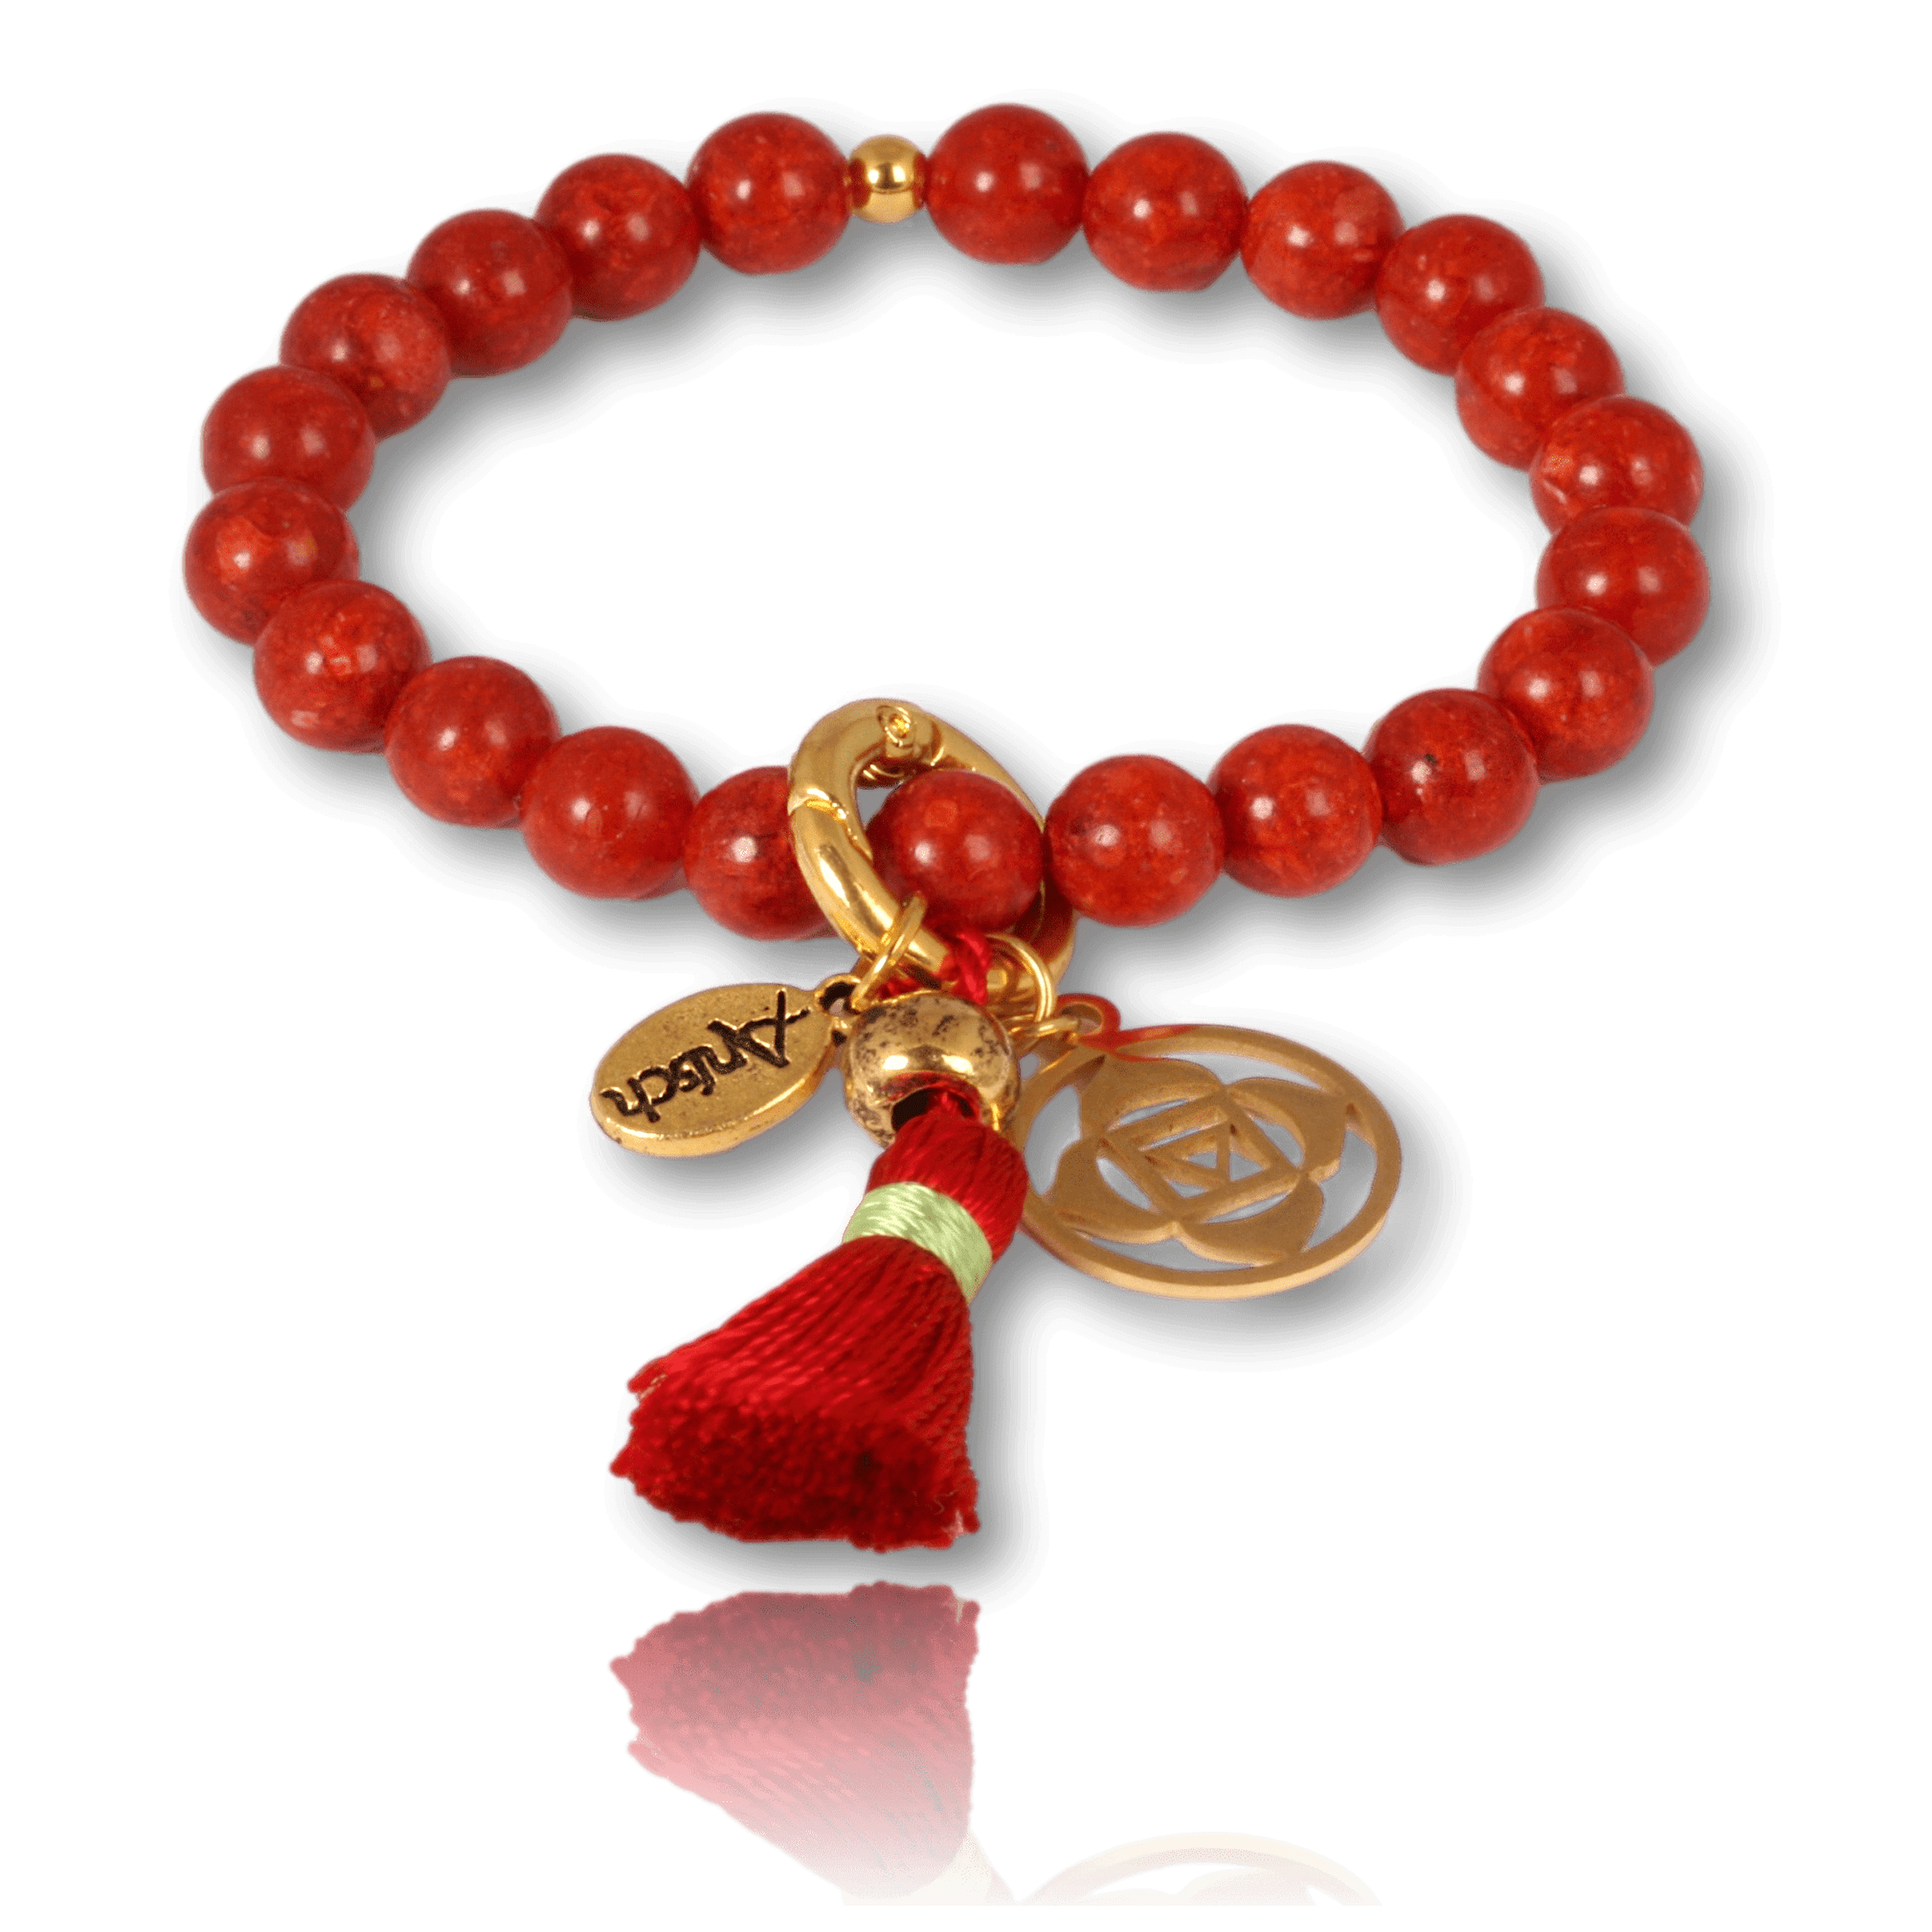 Coral gemstone bracelet gold-plated for your root chakra: grounding & basic trust